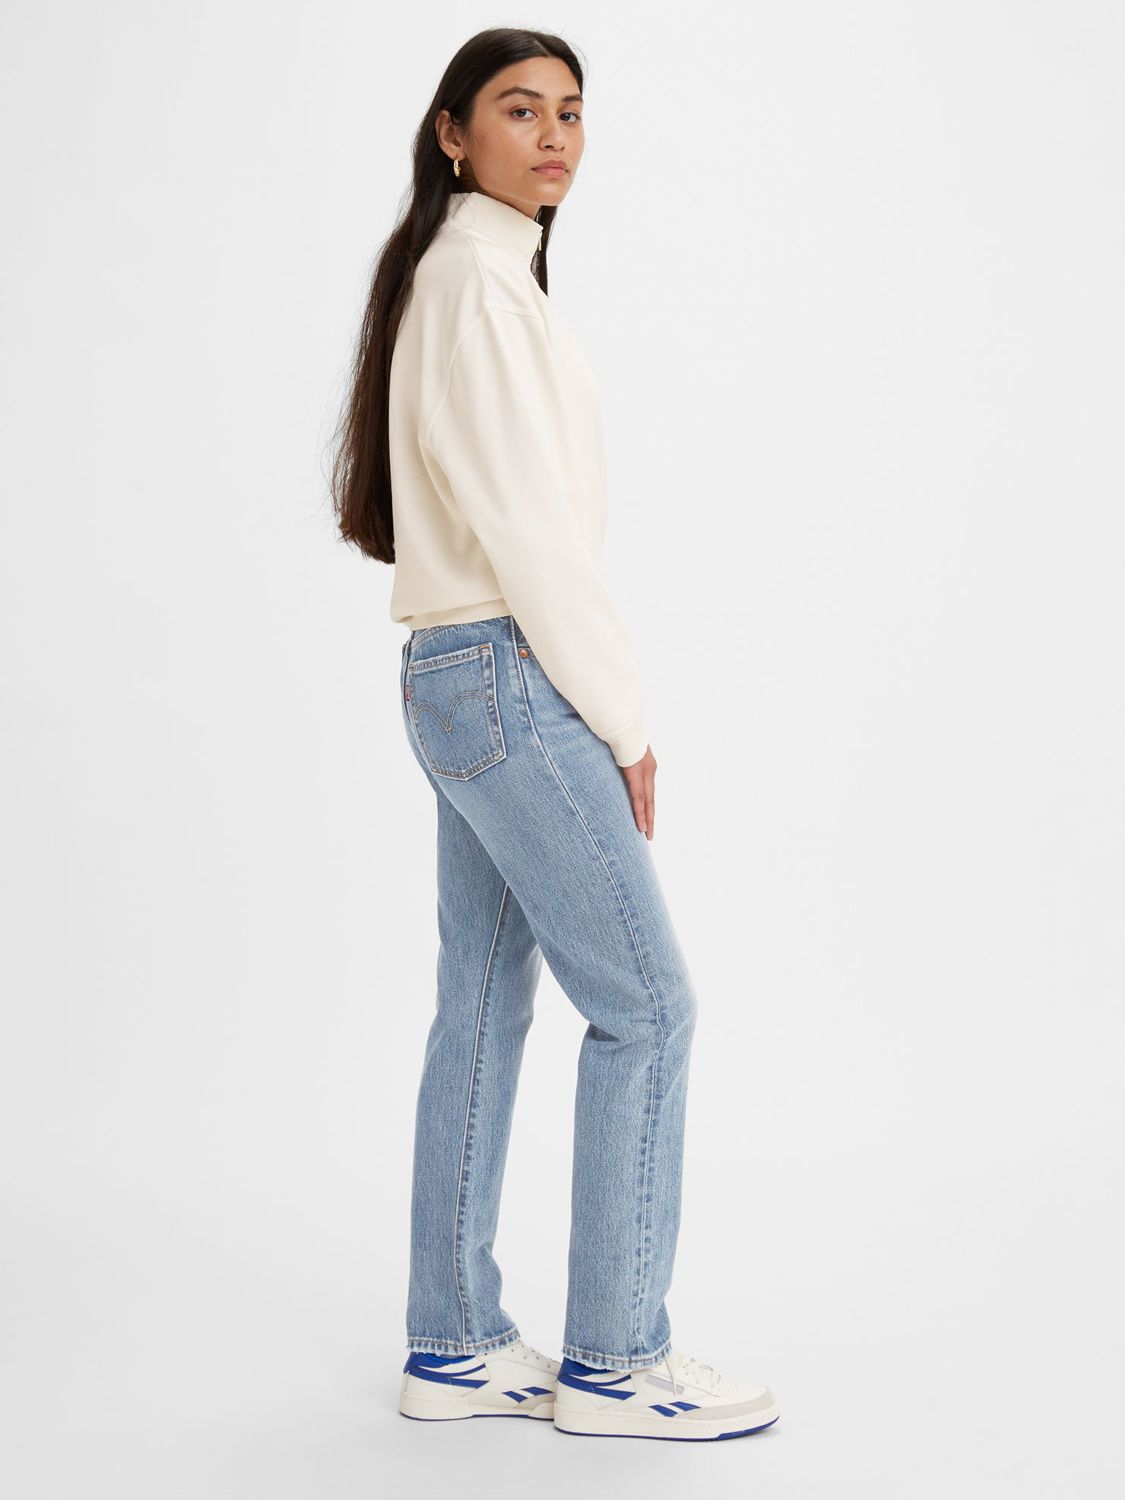 Levi's 501 Straight Cut Jeans, Hollow Days at John Lewis & Partners